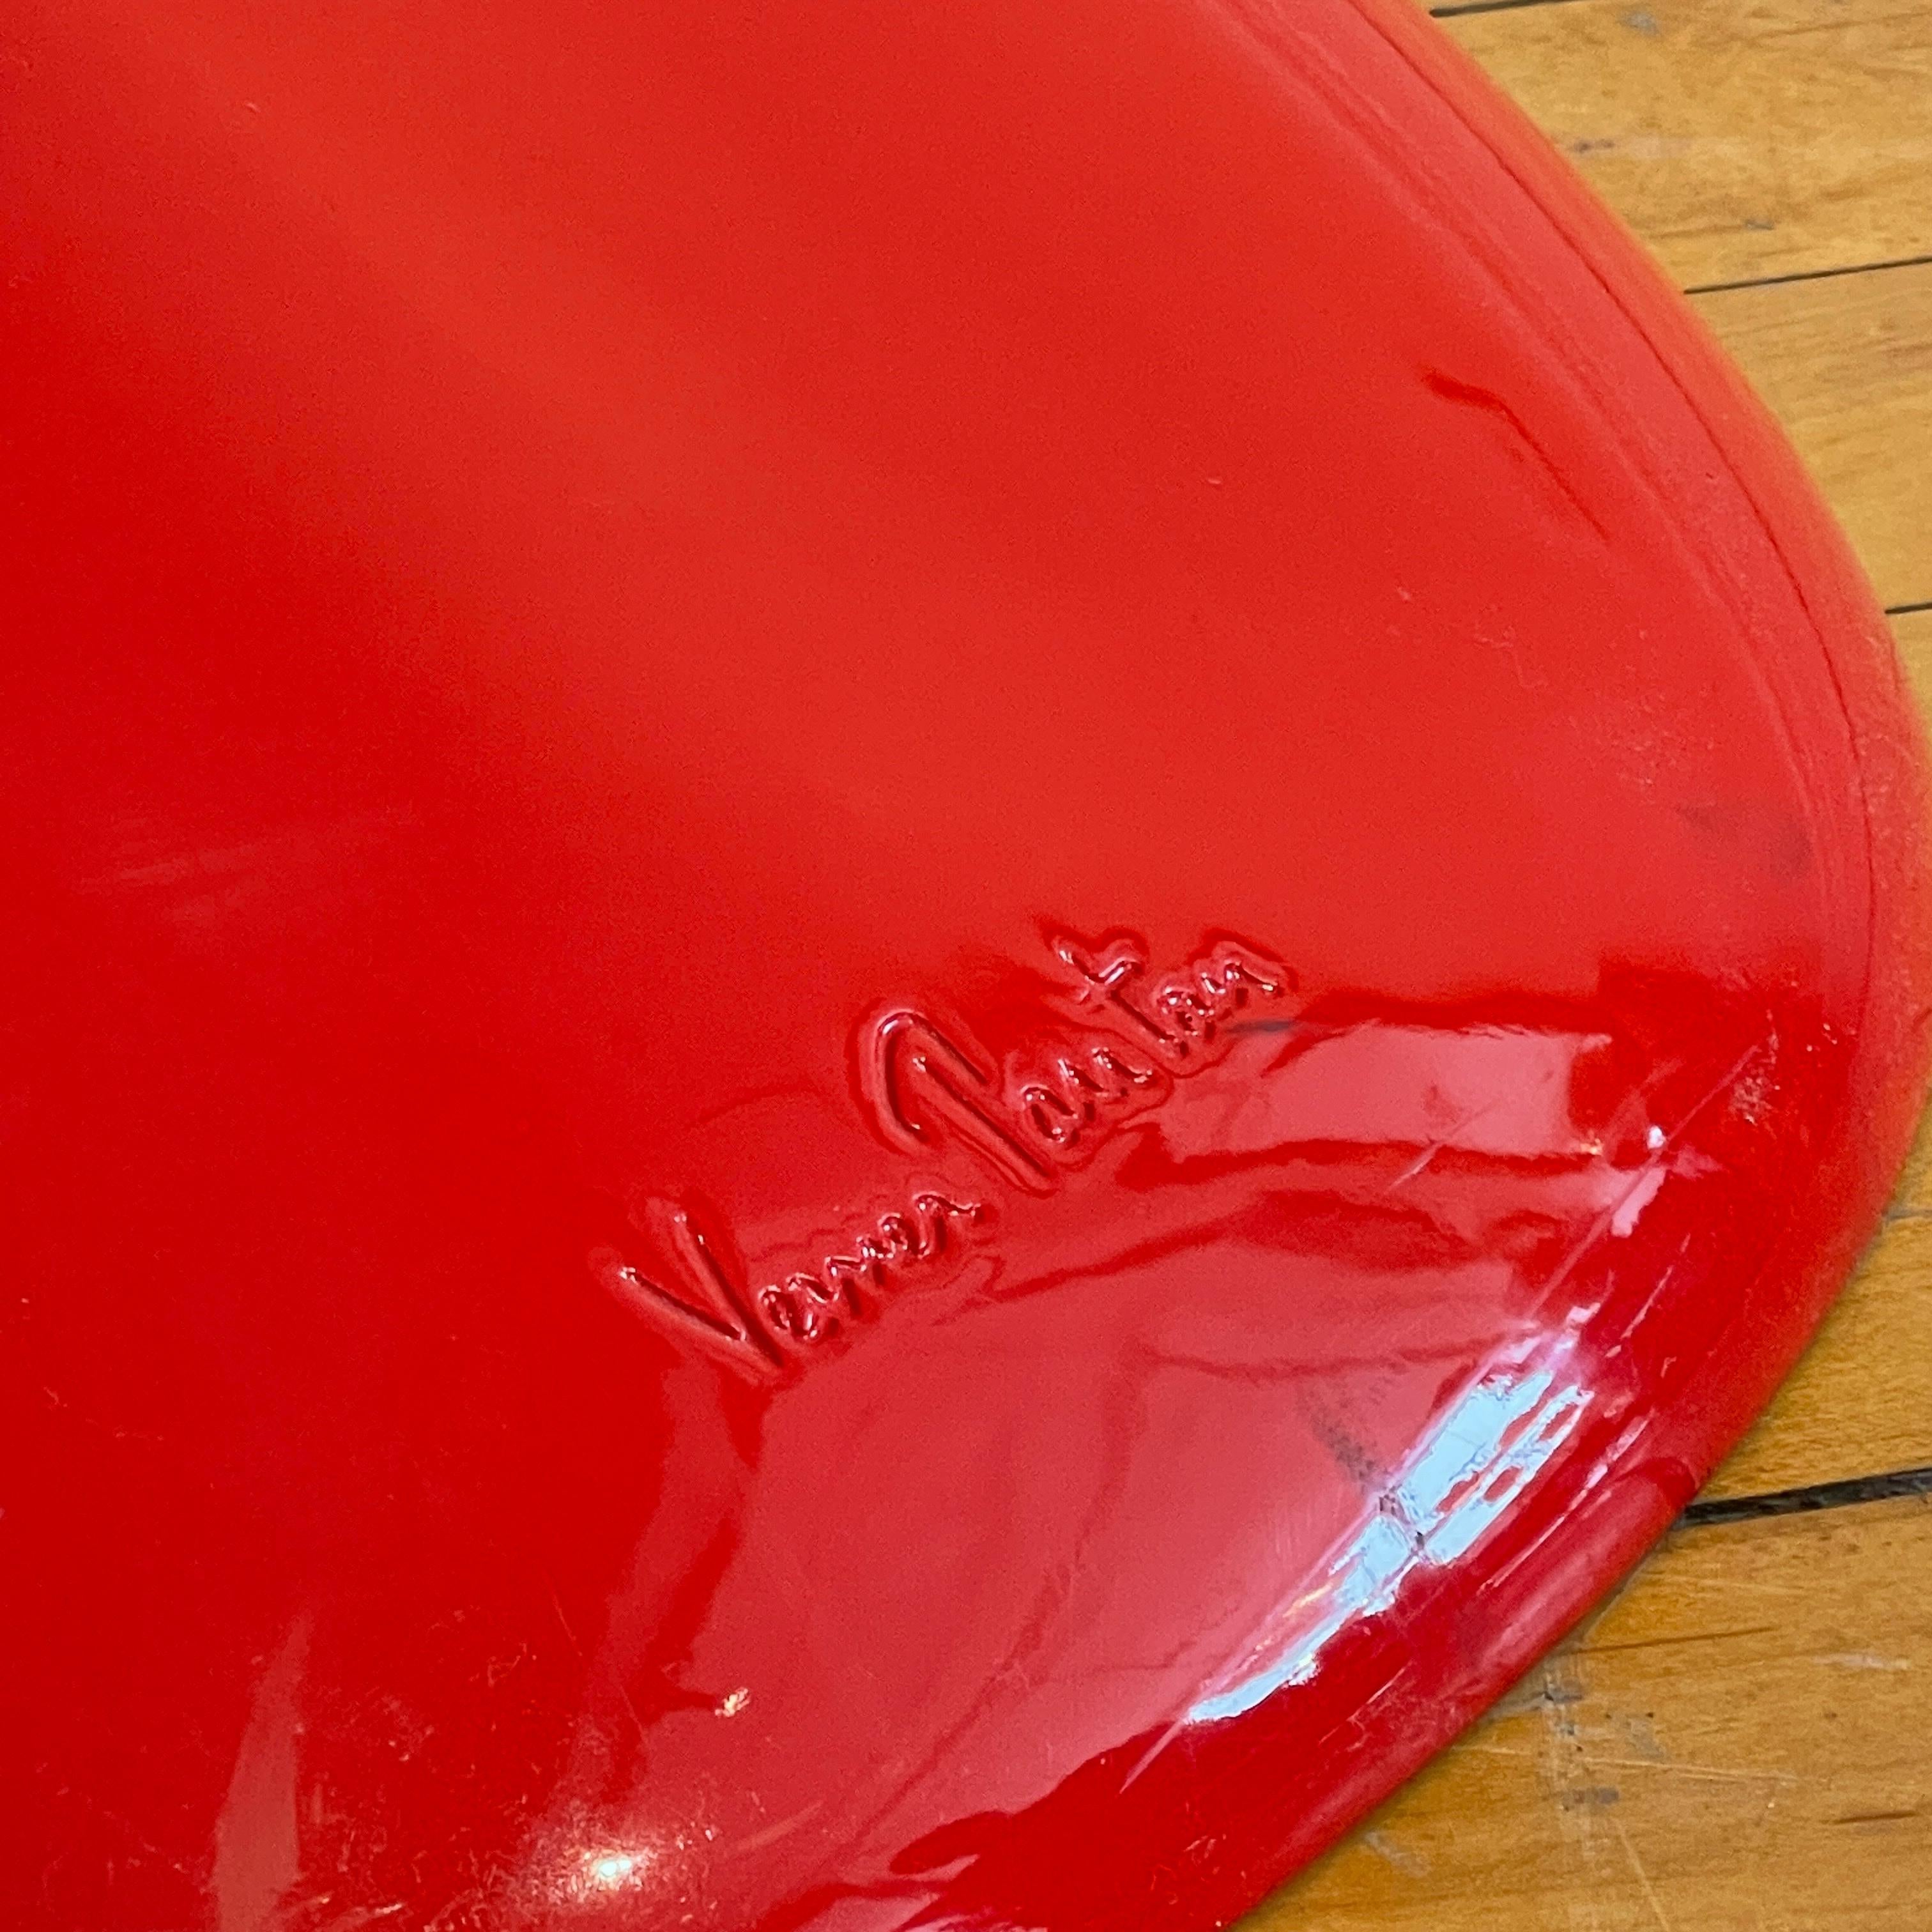 Fiberglass Verner Panton Classic Chairs in Red 2  Available